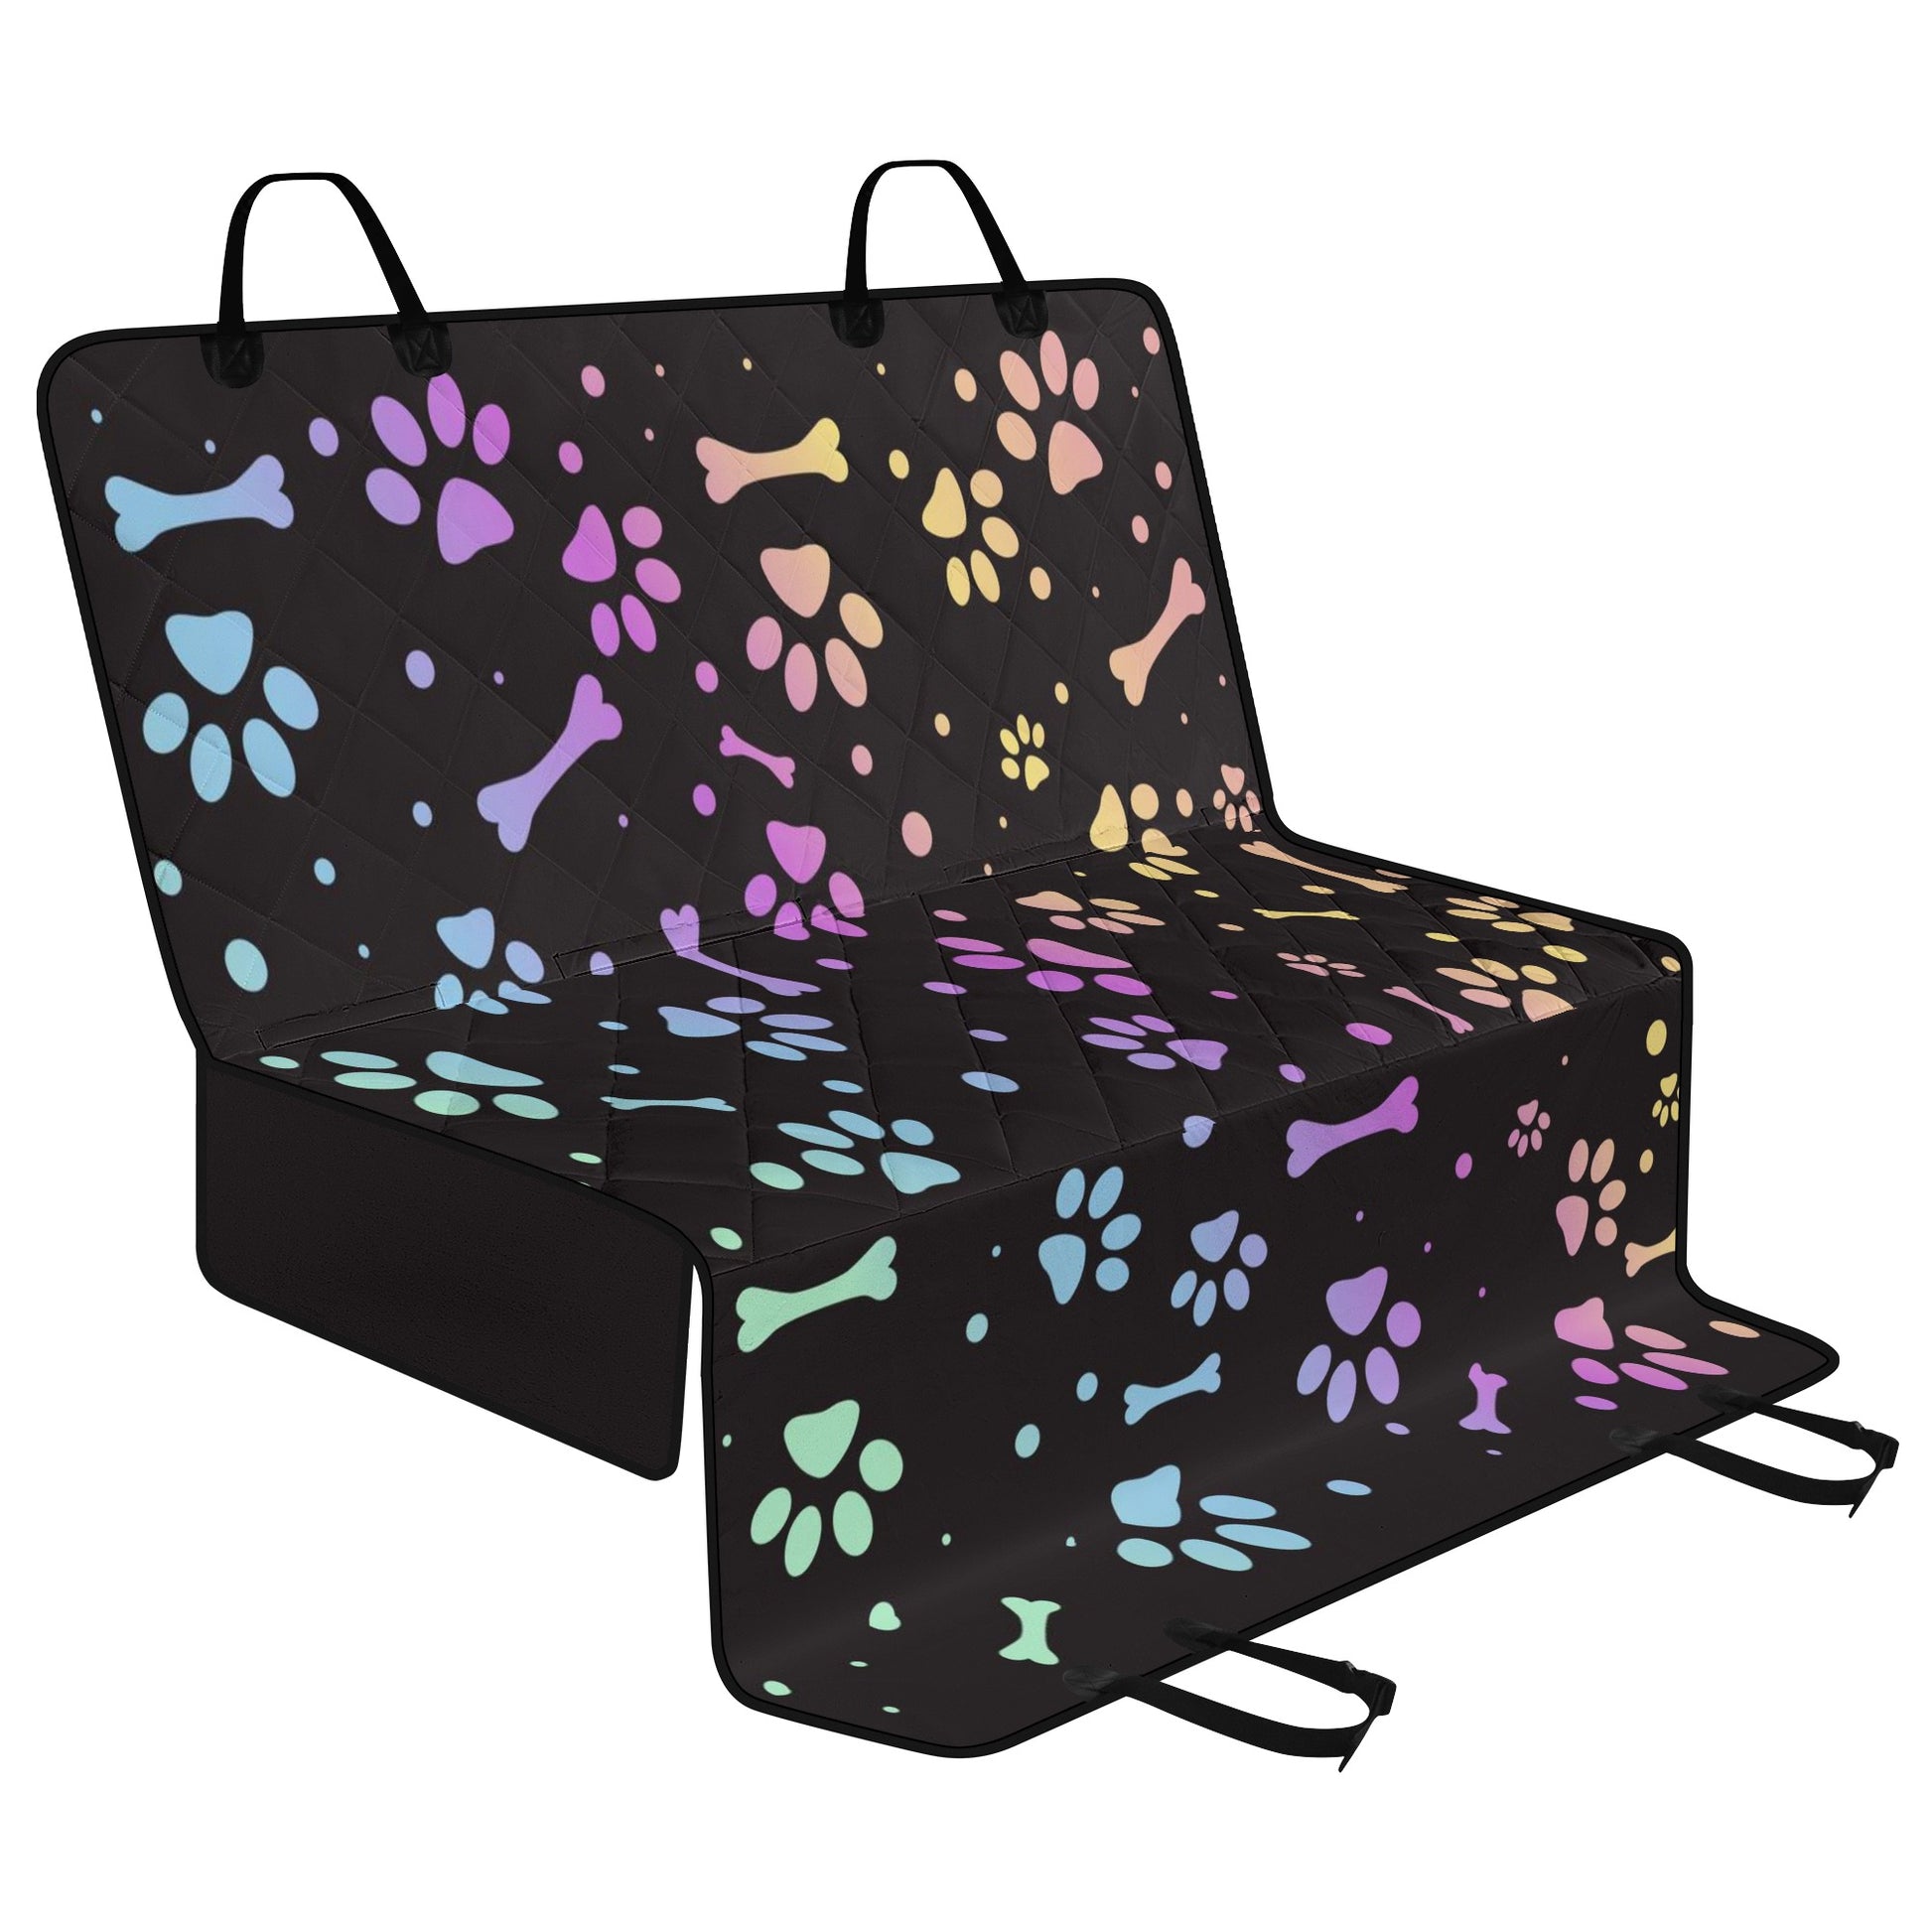 Travel in style with your furry best friend with our Colorful Car Dog Seat Covers! These seat covers will keep the backseat clean and dog hair-free, so you won't have any doggone worries as you hit the road.